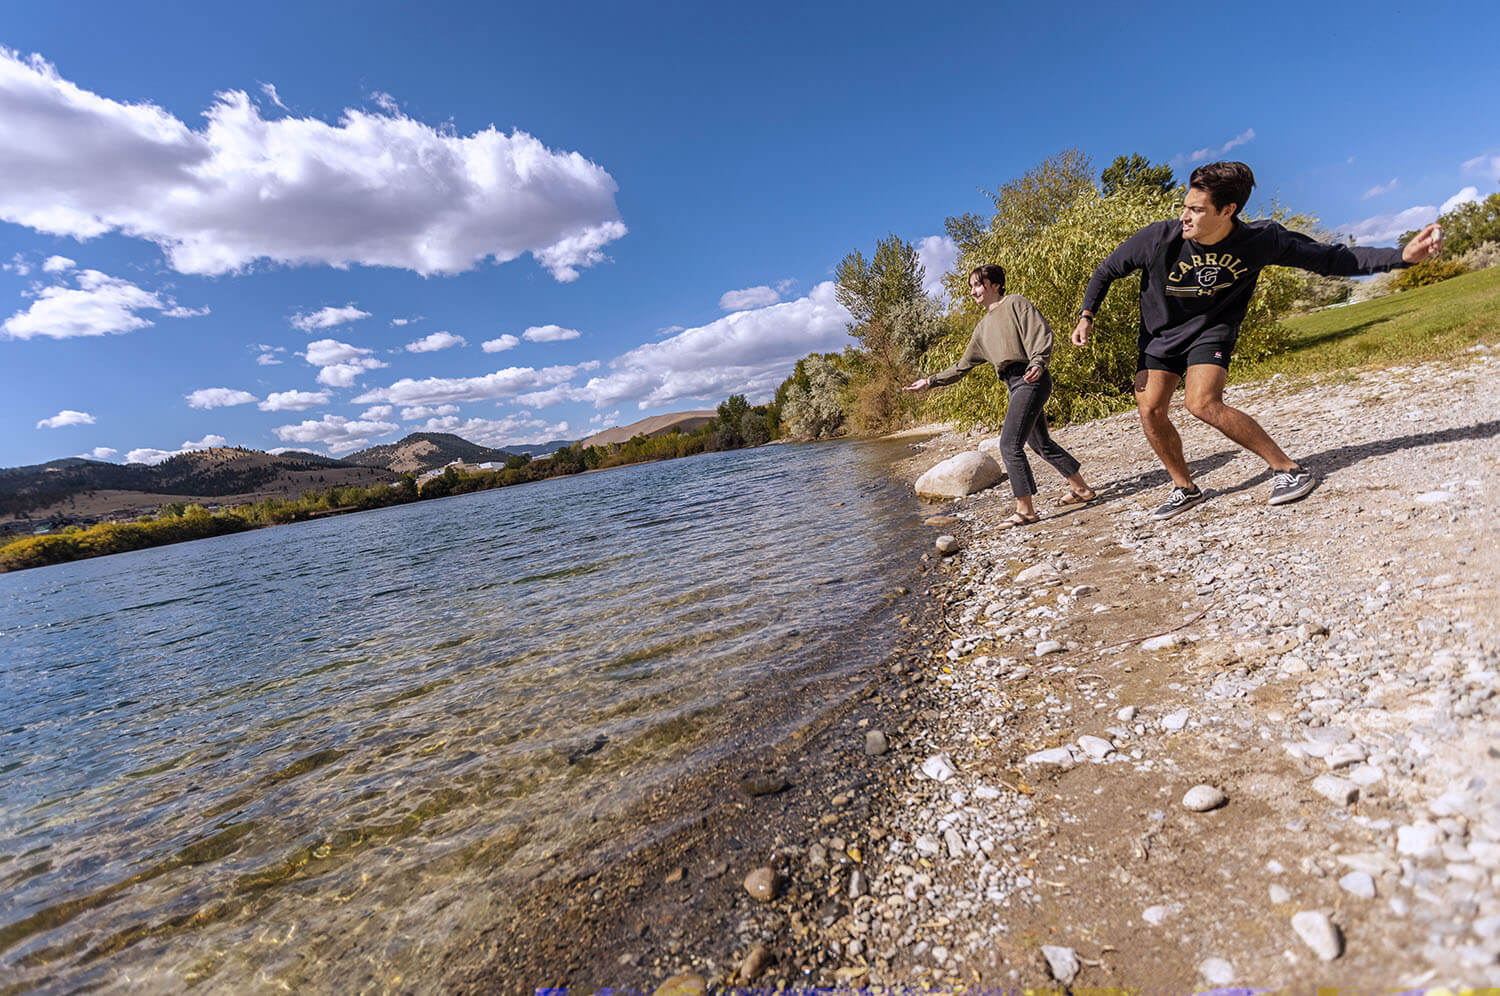 Two students skipping rocks against a perfectly blue sky and clear river